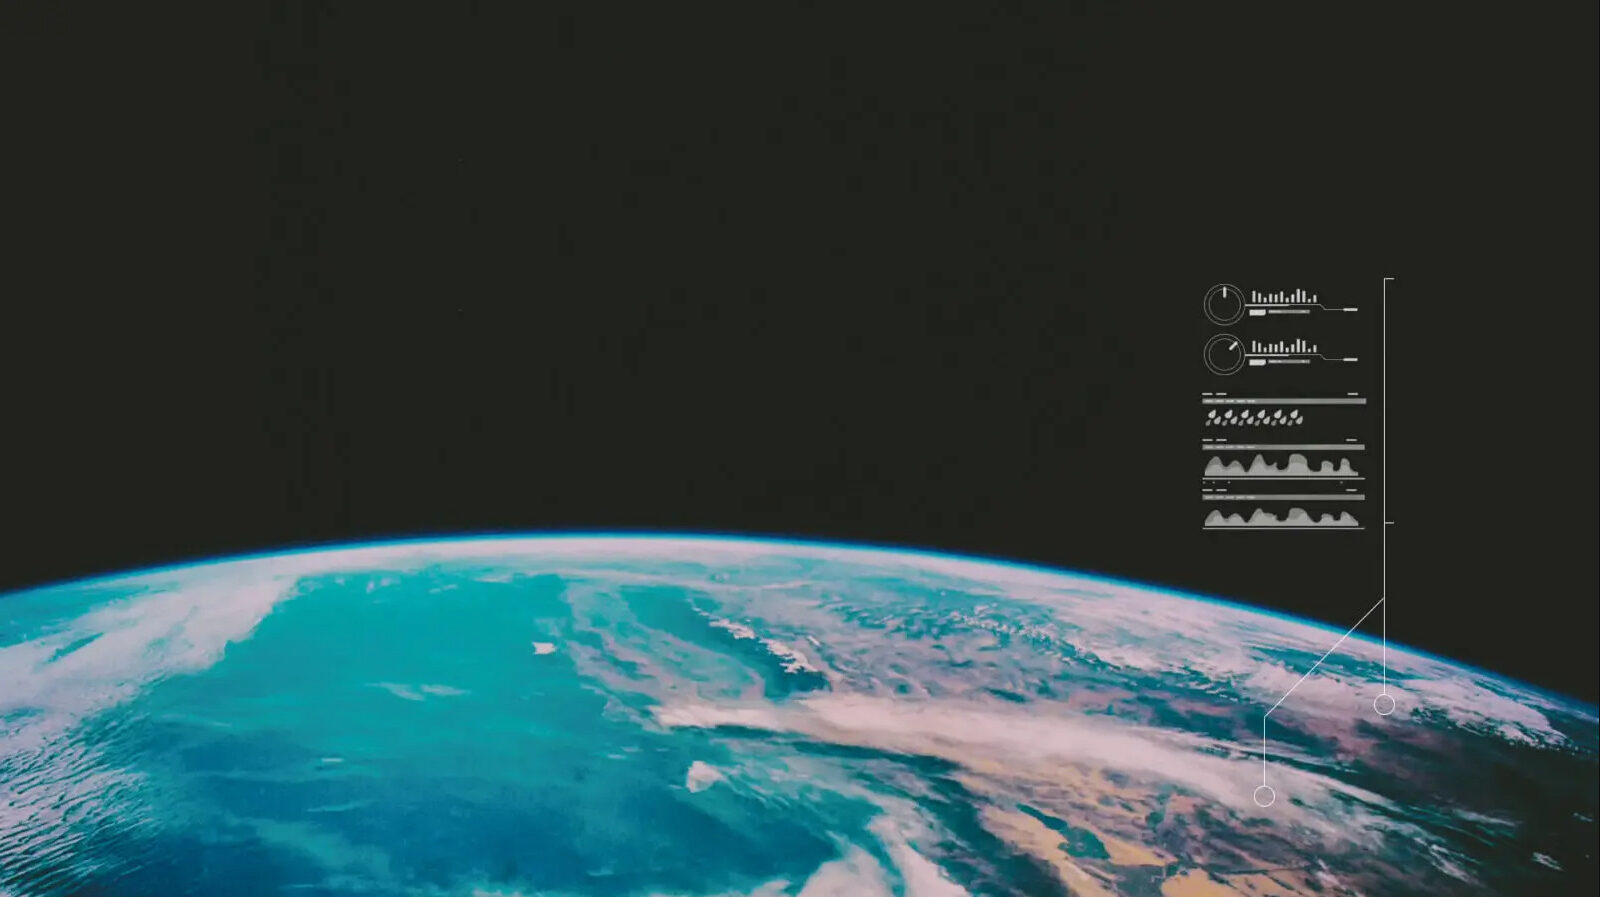 image of earth from space with data visualization overlay